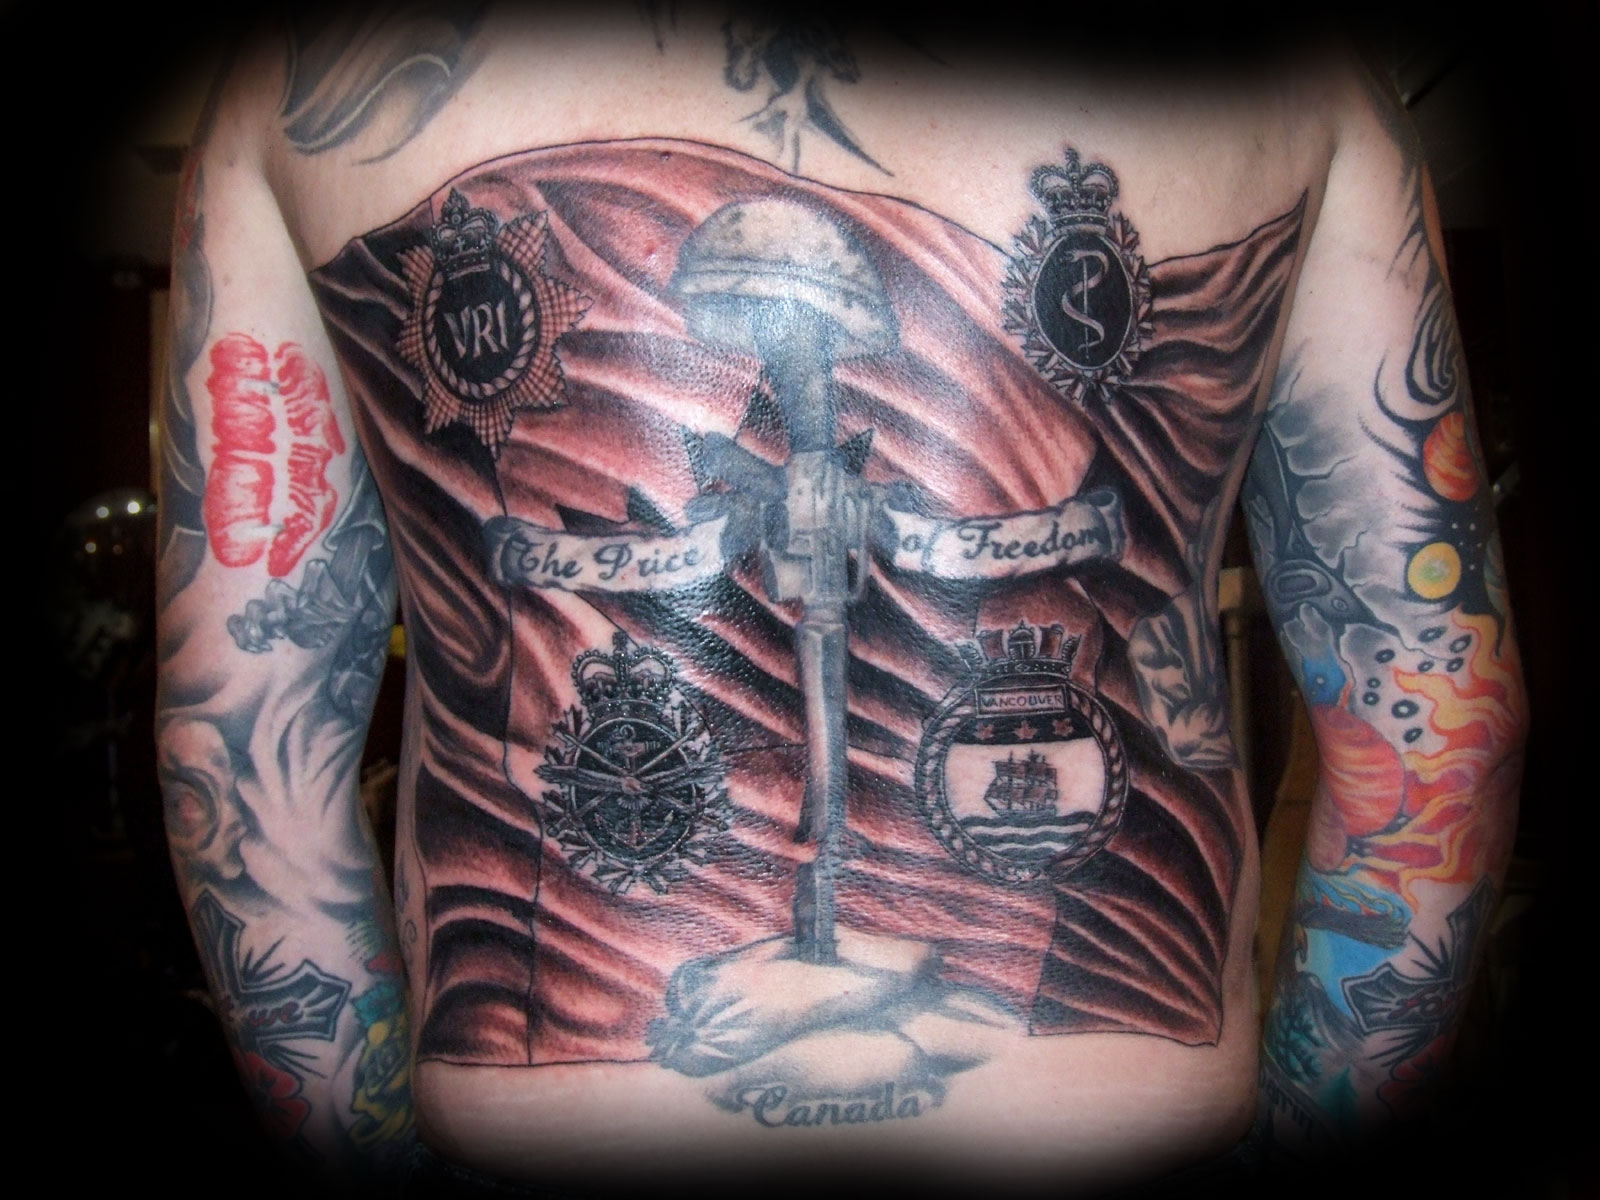 Military Army Tattoos Designs Ideas and Meaning Tattoos For You